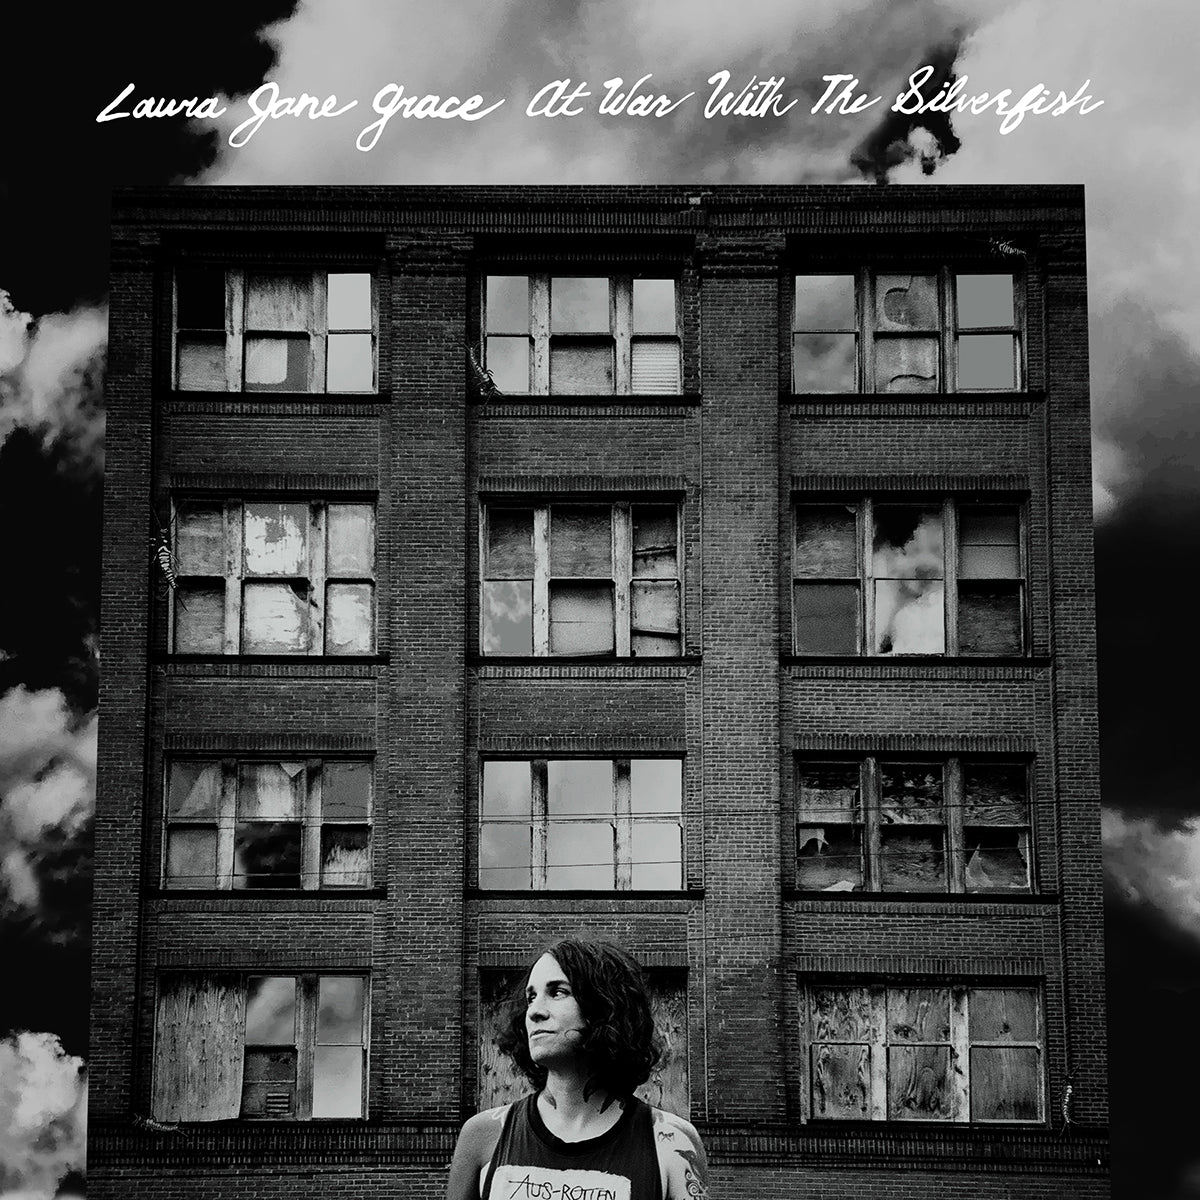 Laura Jane Grace - At War With The Silverfish - Download